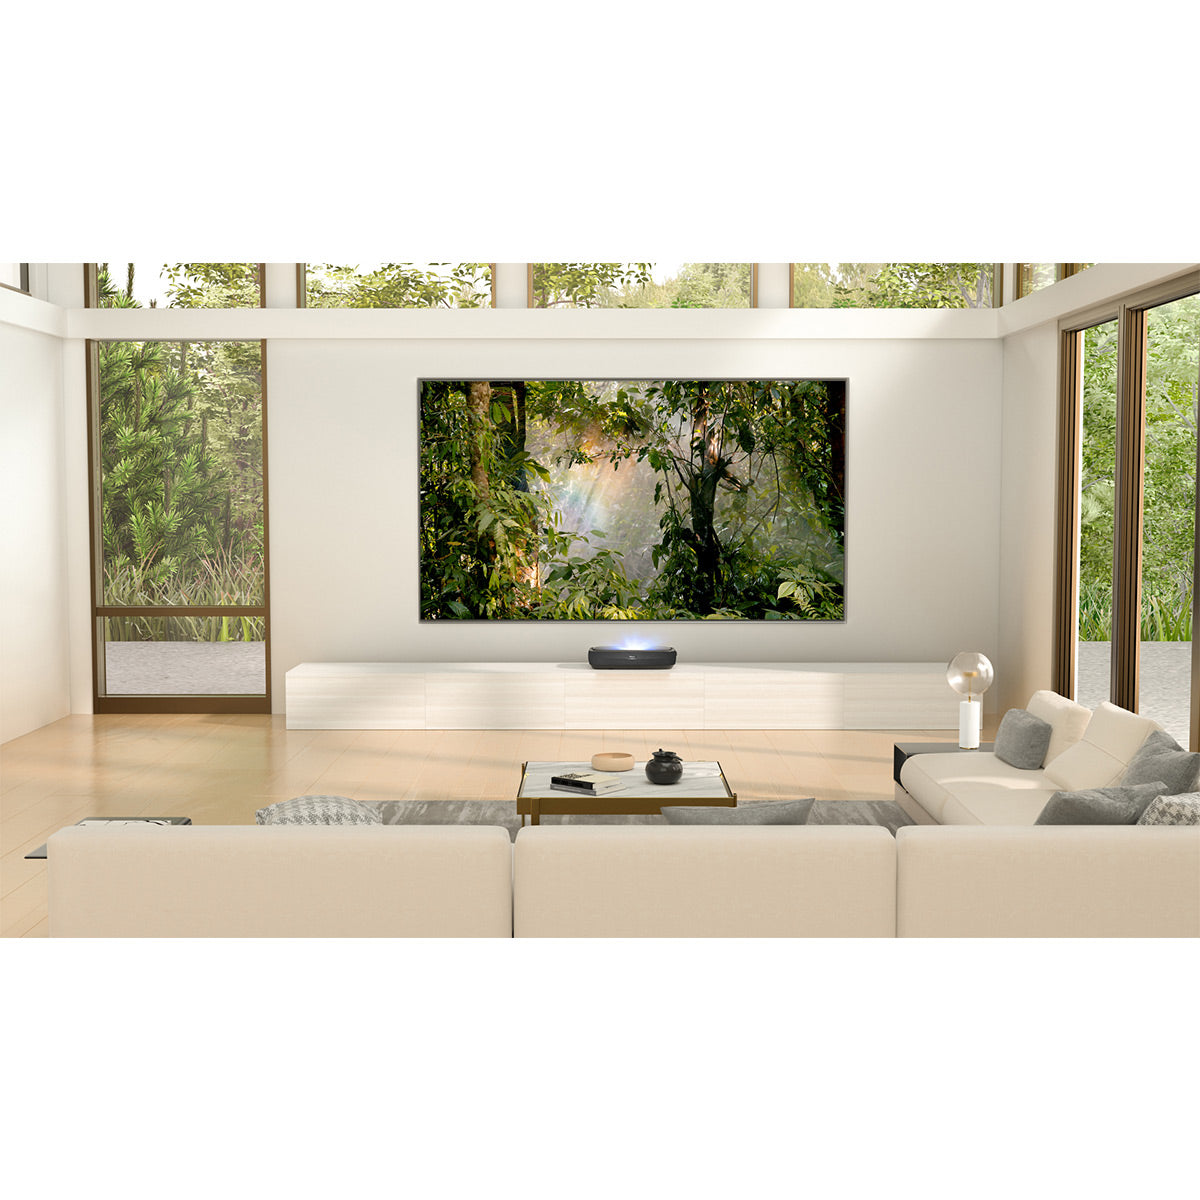 Hisense L9G Ultra Short Throw TriChroma Triple-Laser TV Projector and 100" Ambient Light Rejecting Screen